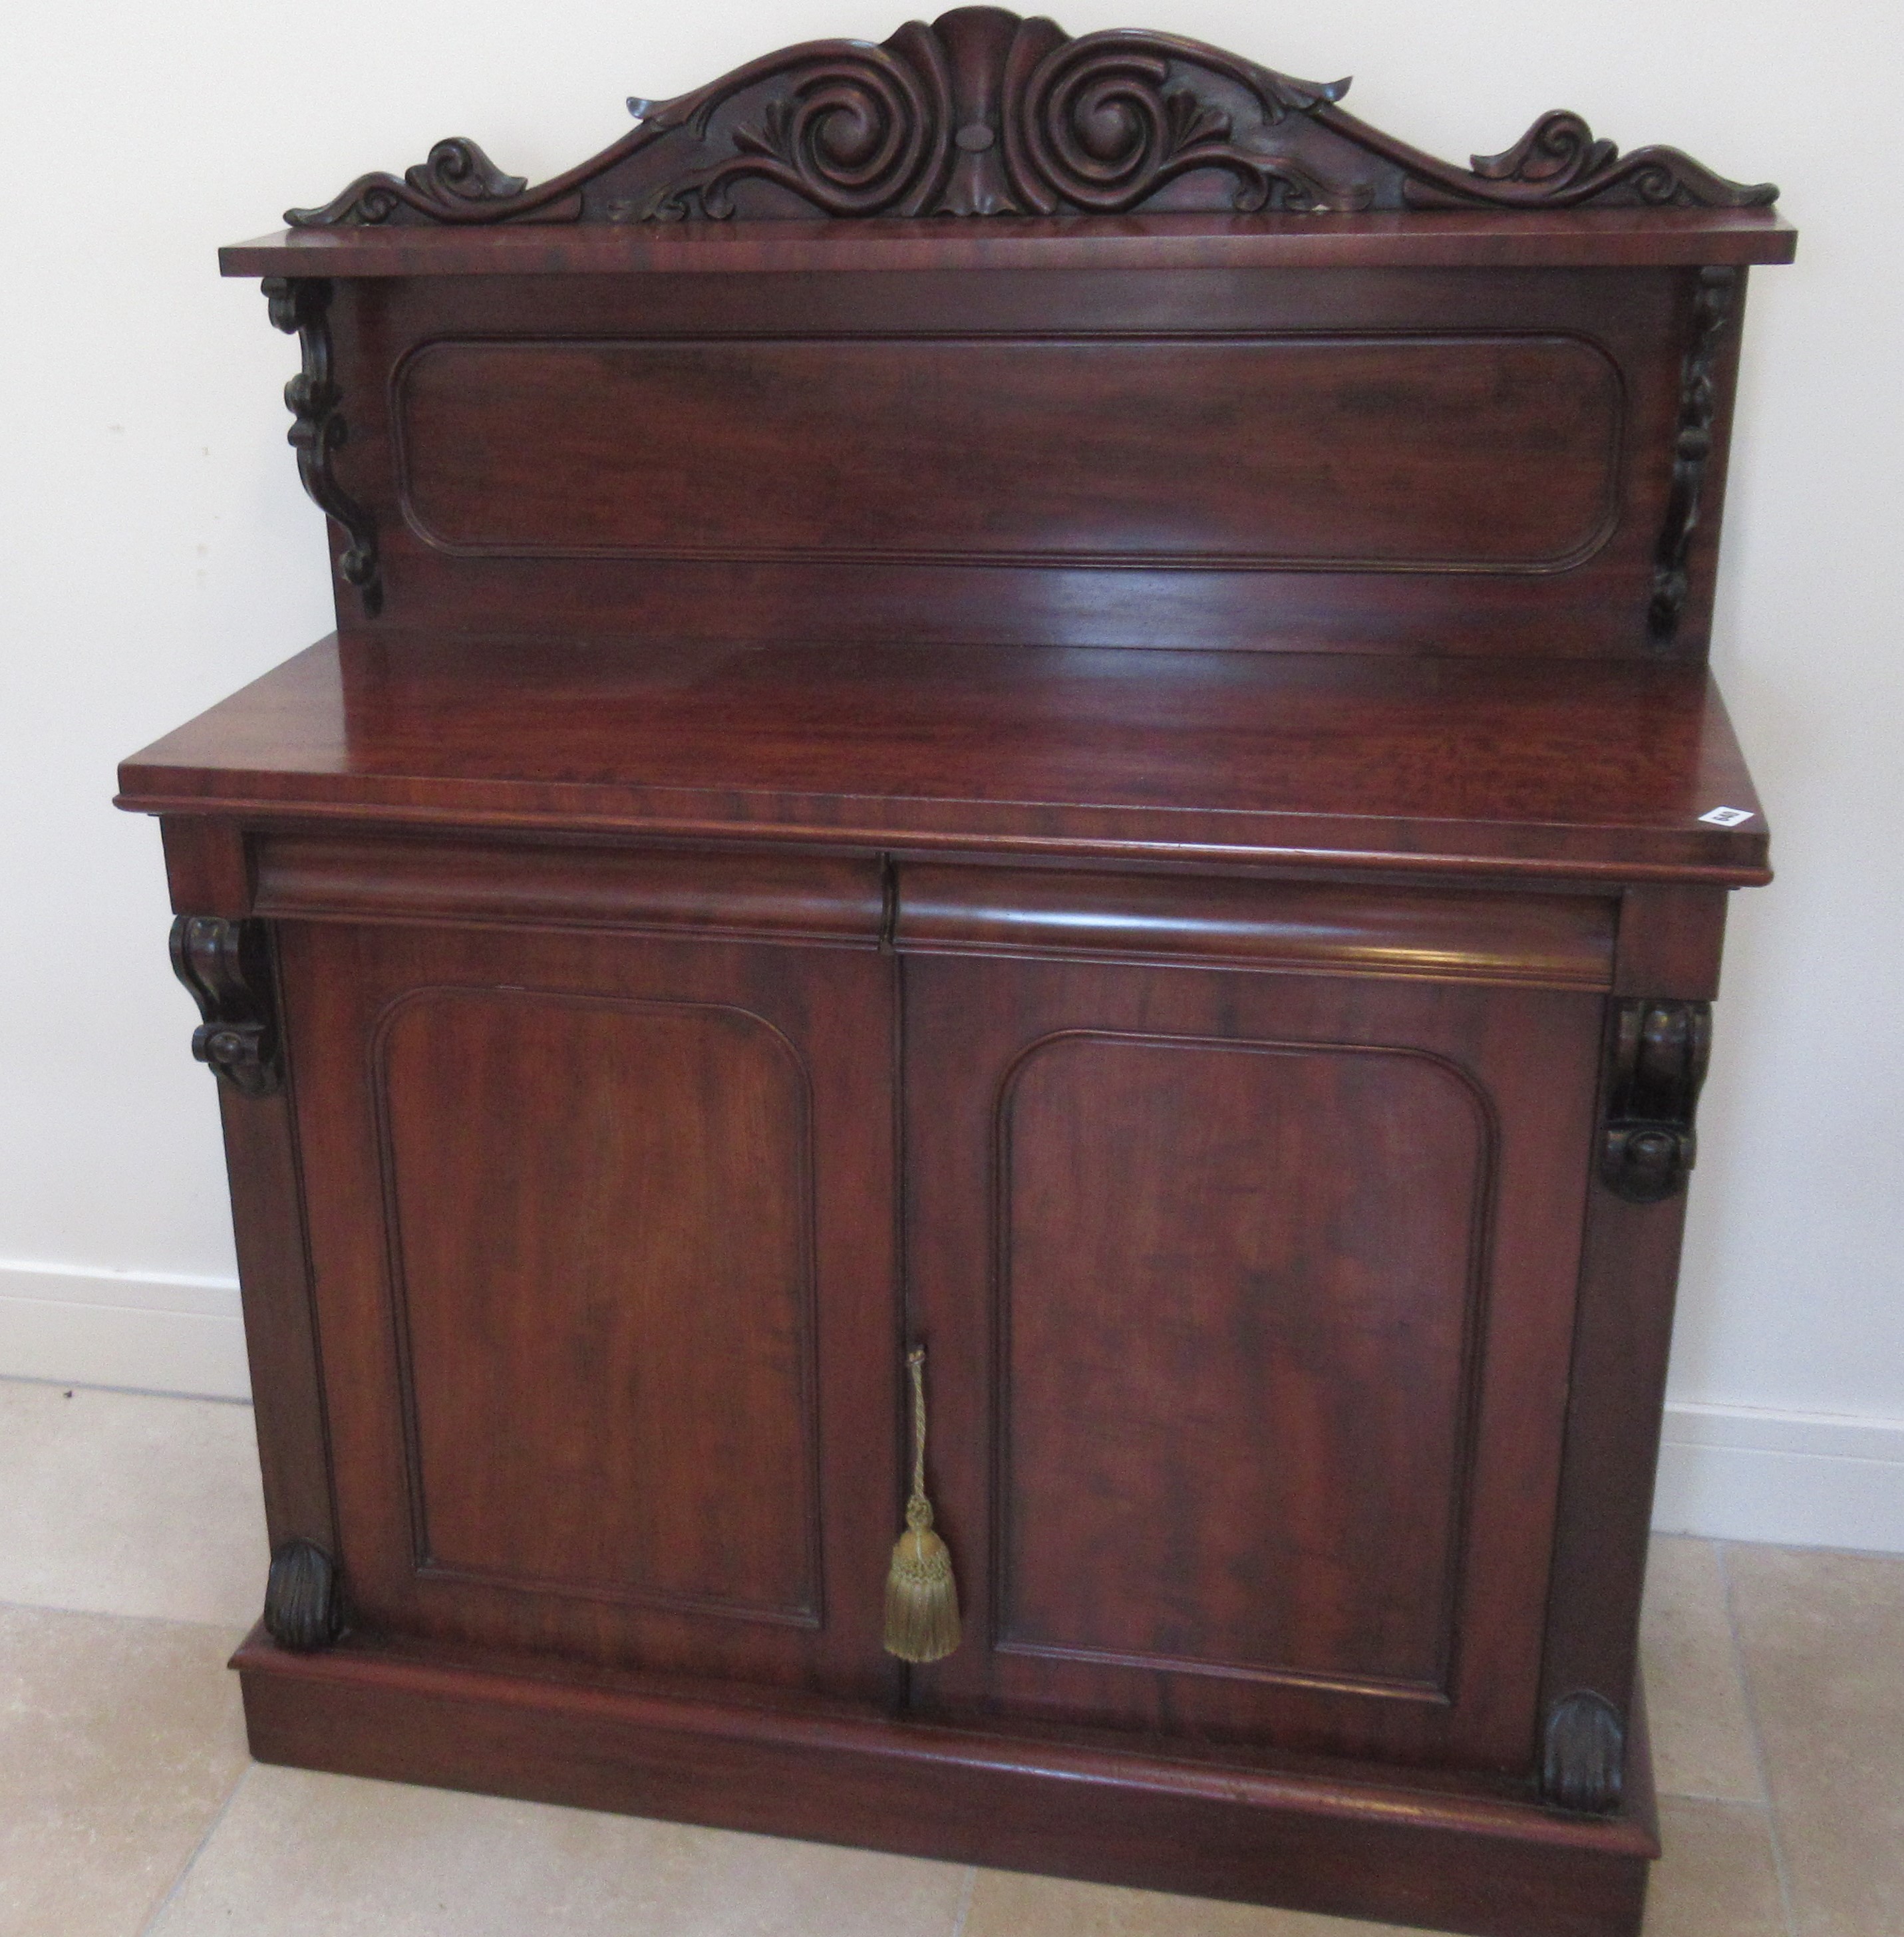 A good quality flame mahogany chiffonier with two drawers over two cupboard doors with a good patina